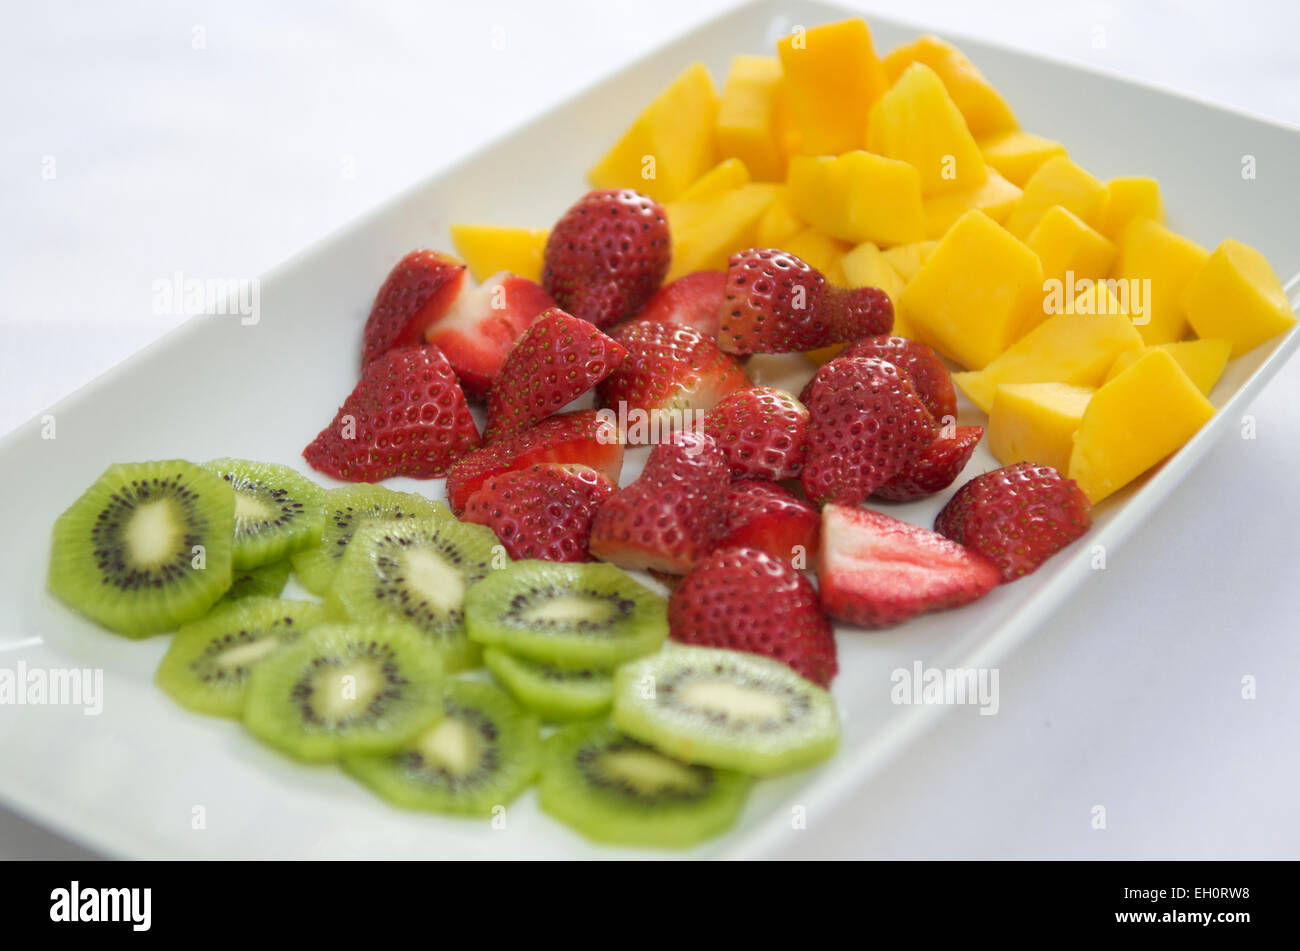 Selection of fresh fruits at breakfast Stock Photo